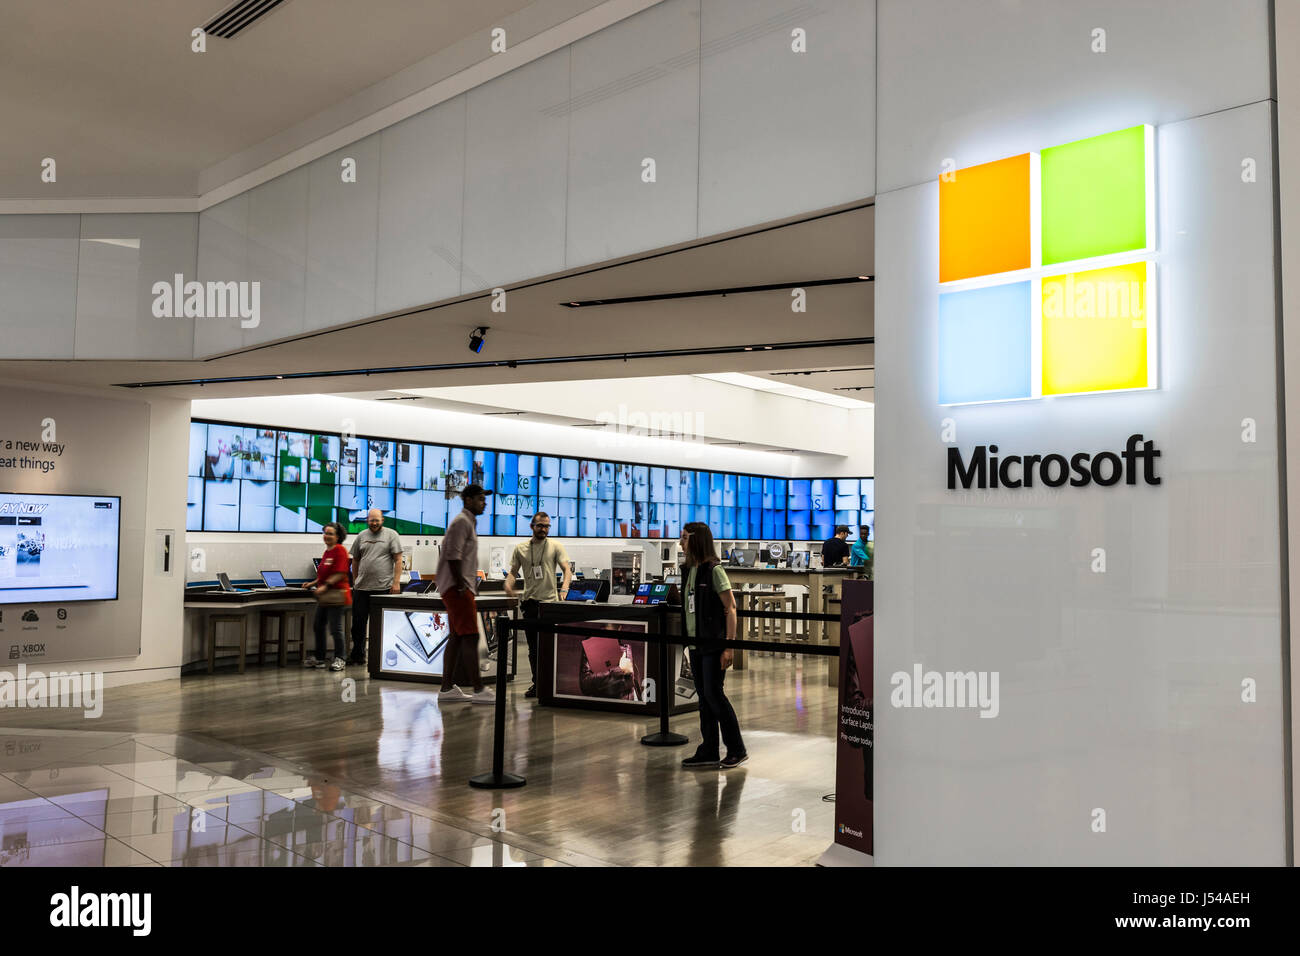 Cincinnati - Circa May 2017: Microsoft Retail Technology Store. Microsift develops and manufactures Windows and Surface software V Stock Photo